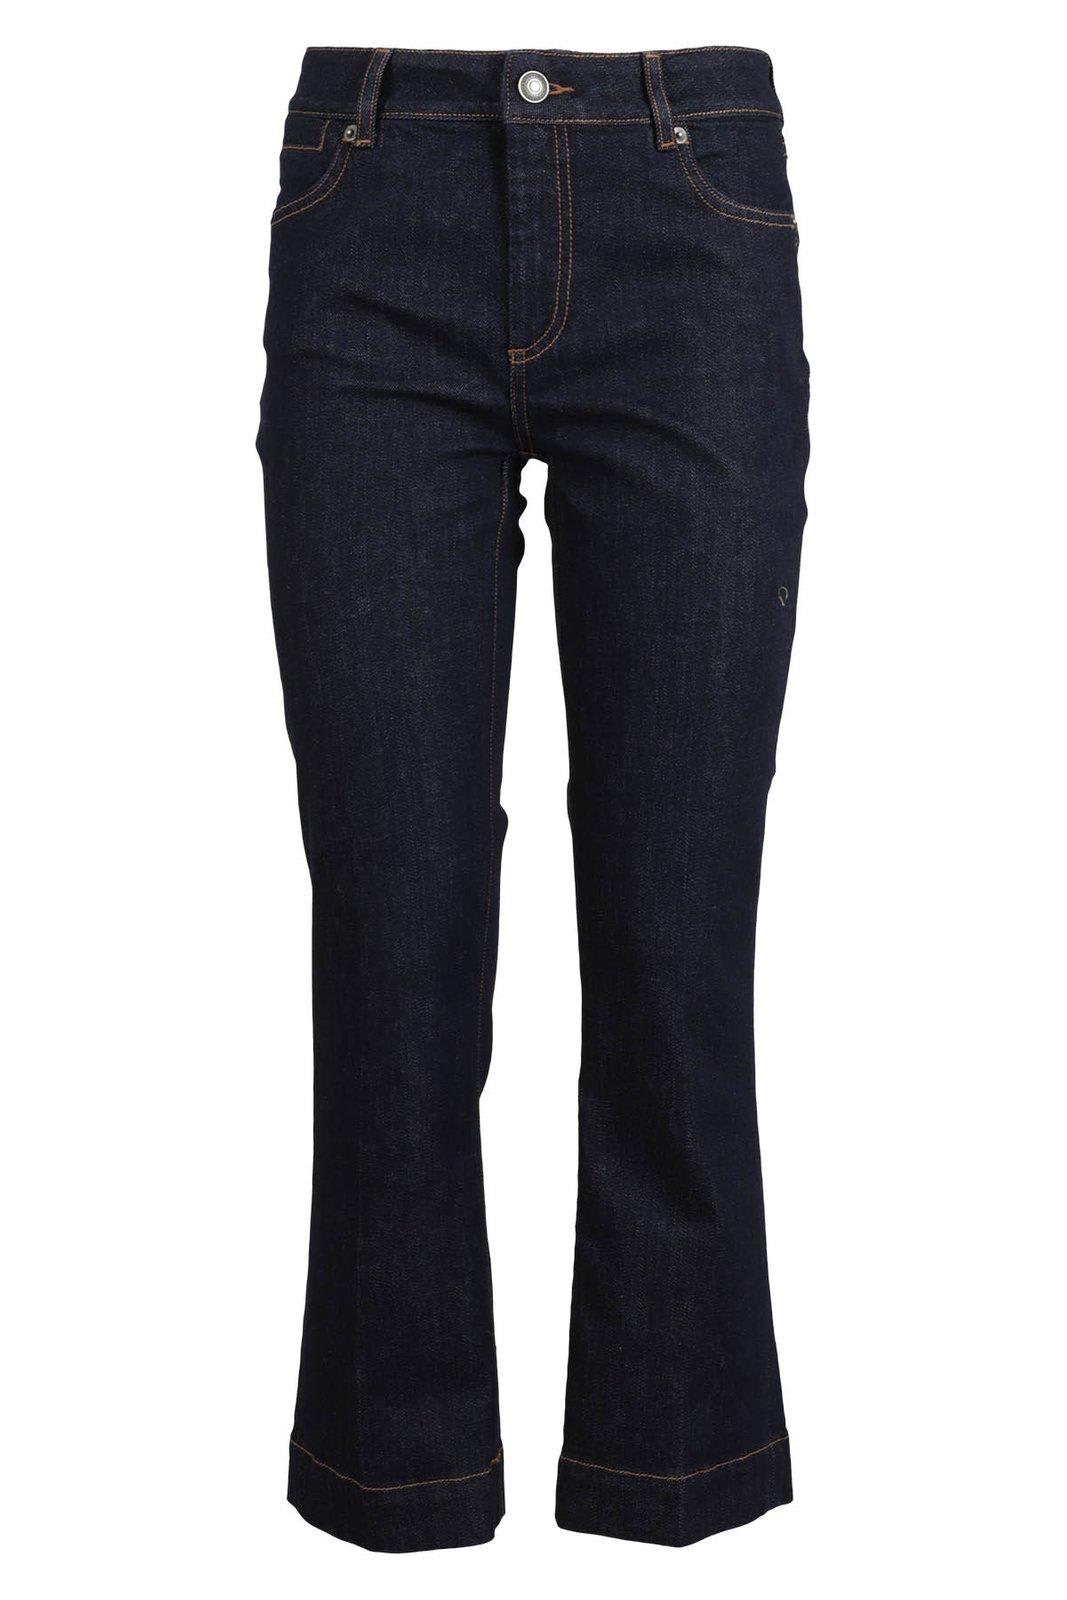 SportMax Button Detailed Flared Jeans